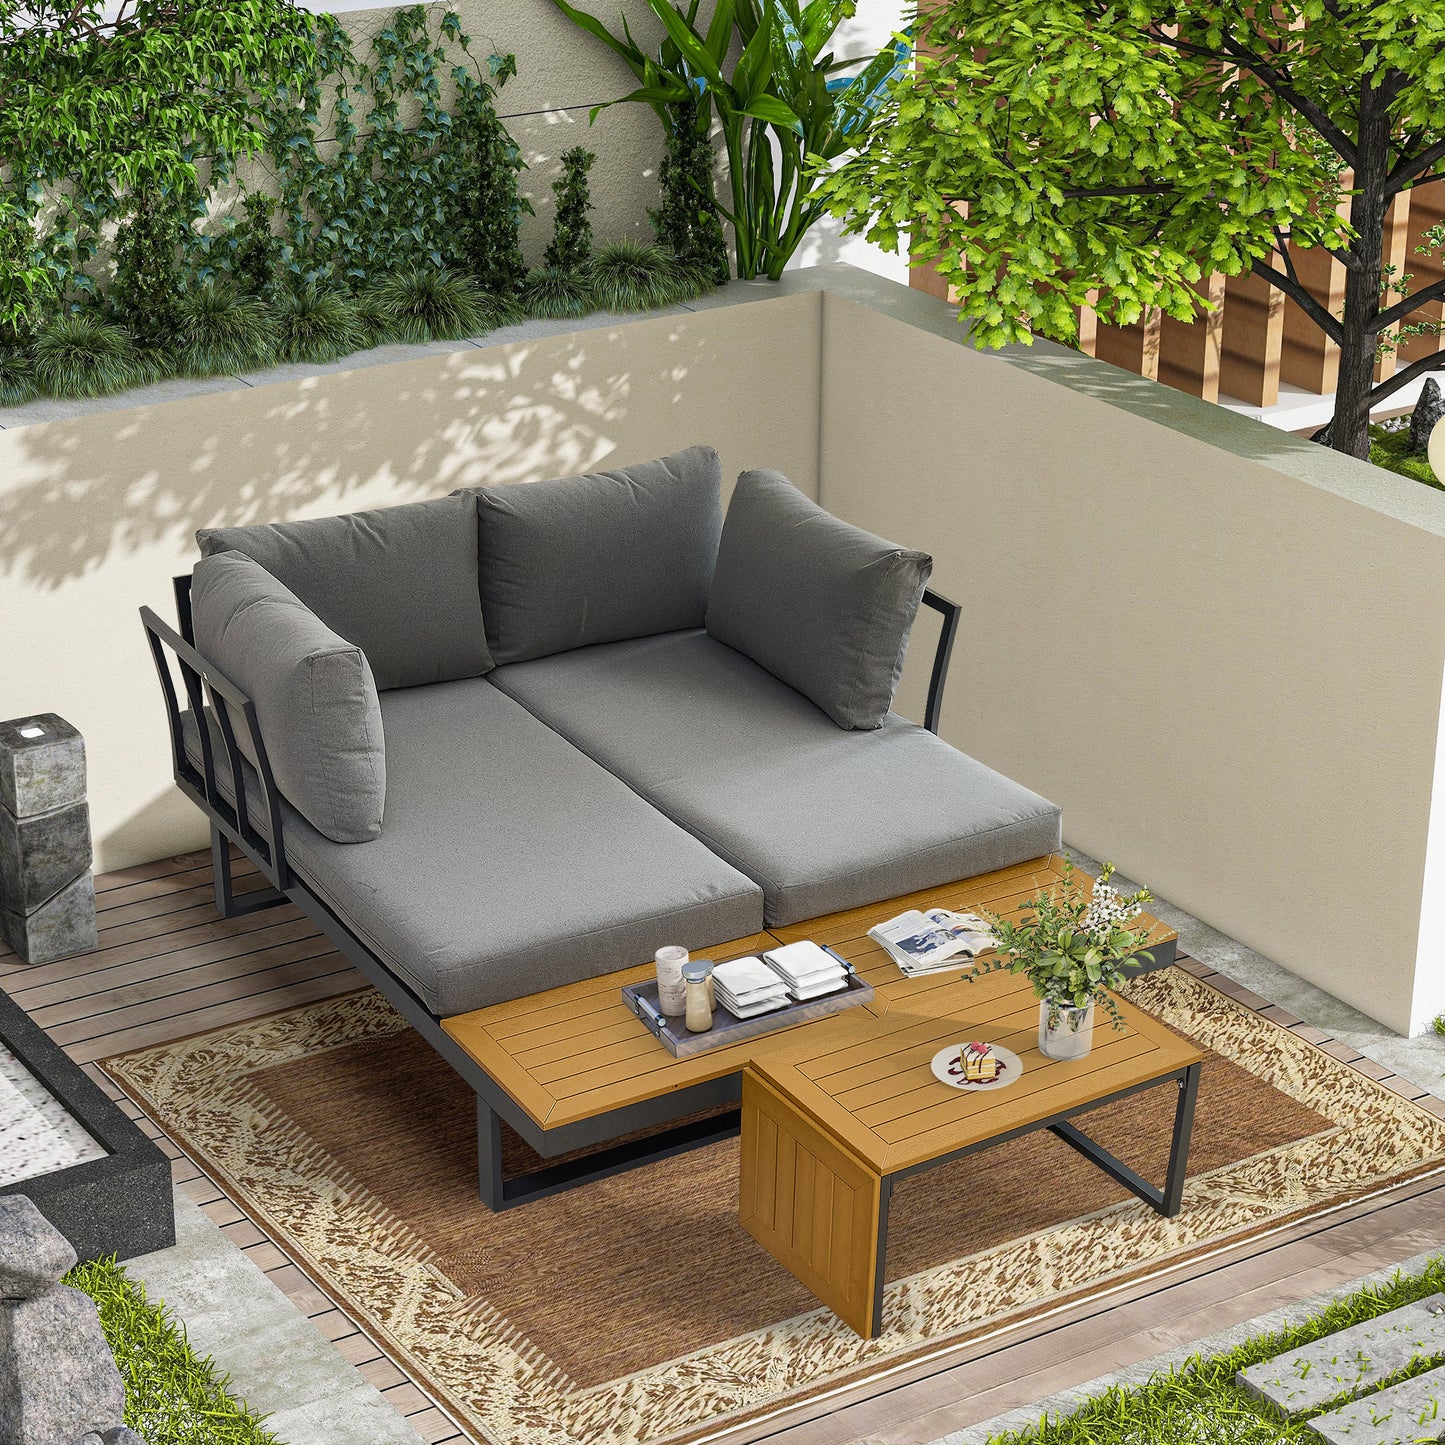 Aluminum Patio Furniture Set, L-Shaped Sectional Sofa with Composite Wood Side Table and Soft Cushion